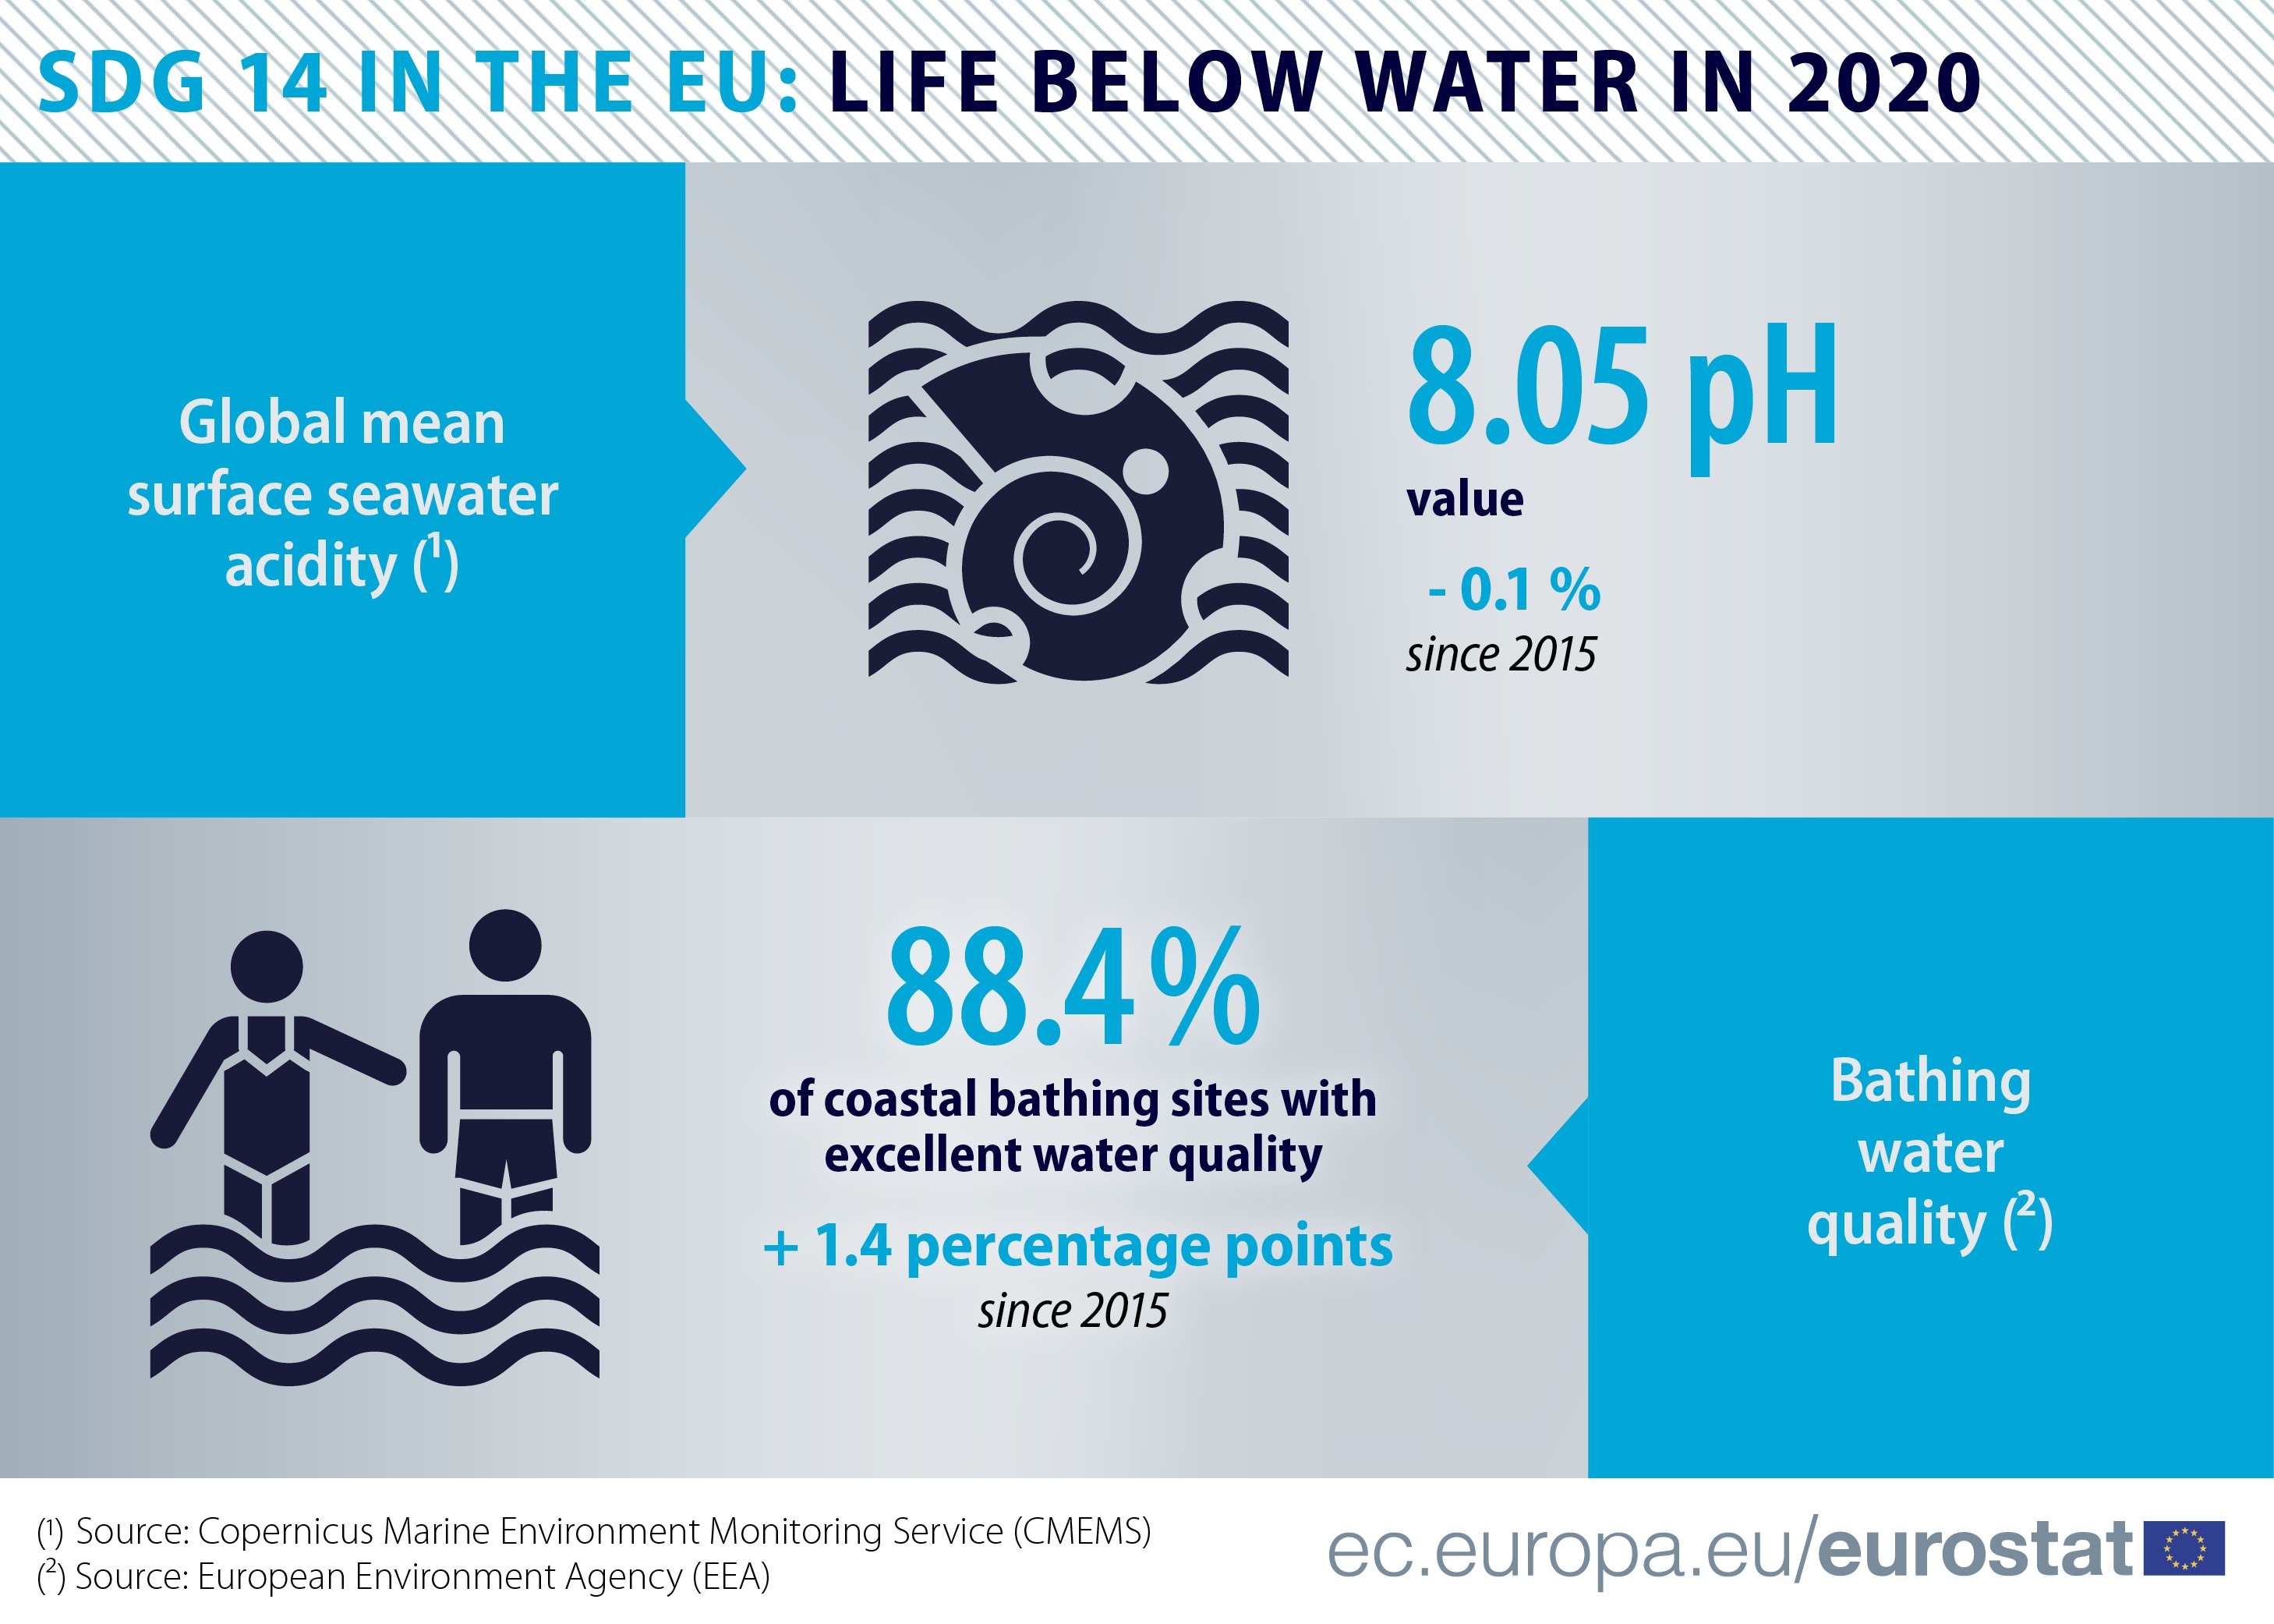 Infographic: SDG 14, life below water in 2020, showing values for global mean surface seawater acidity and bathing water quality